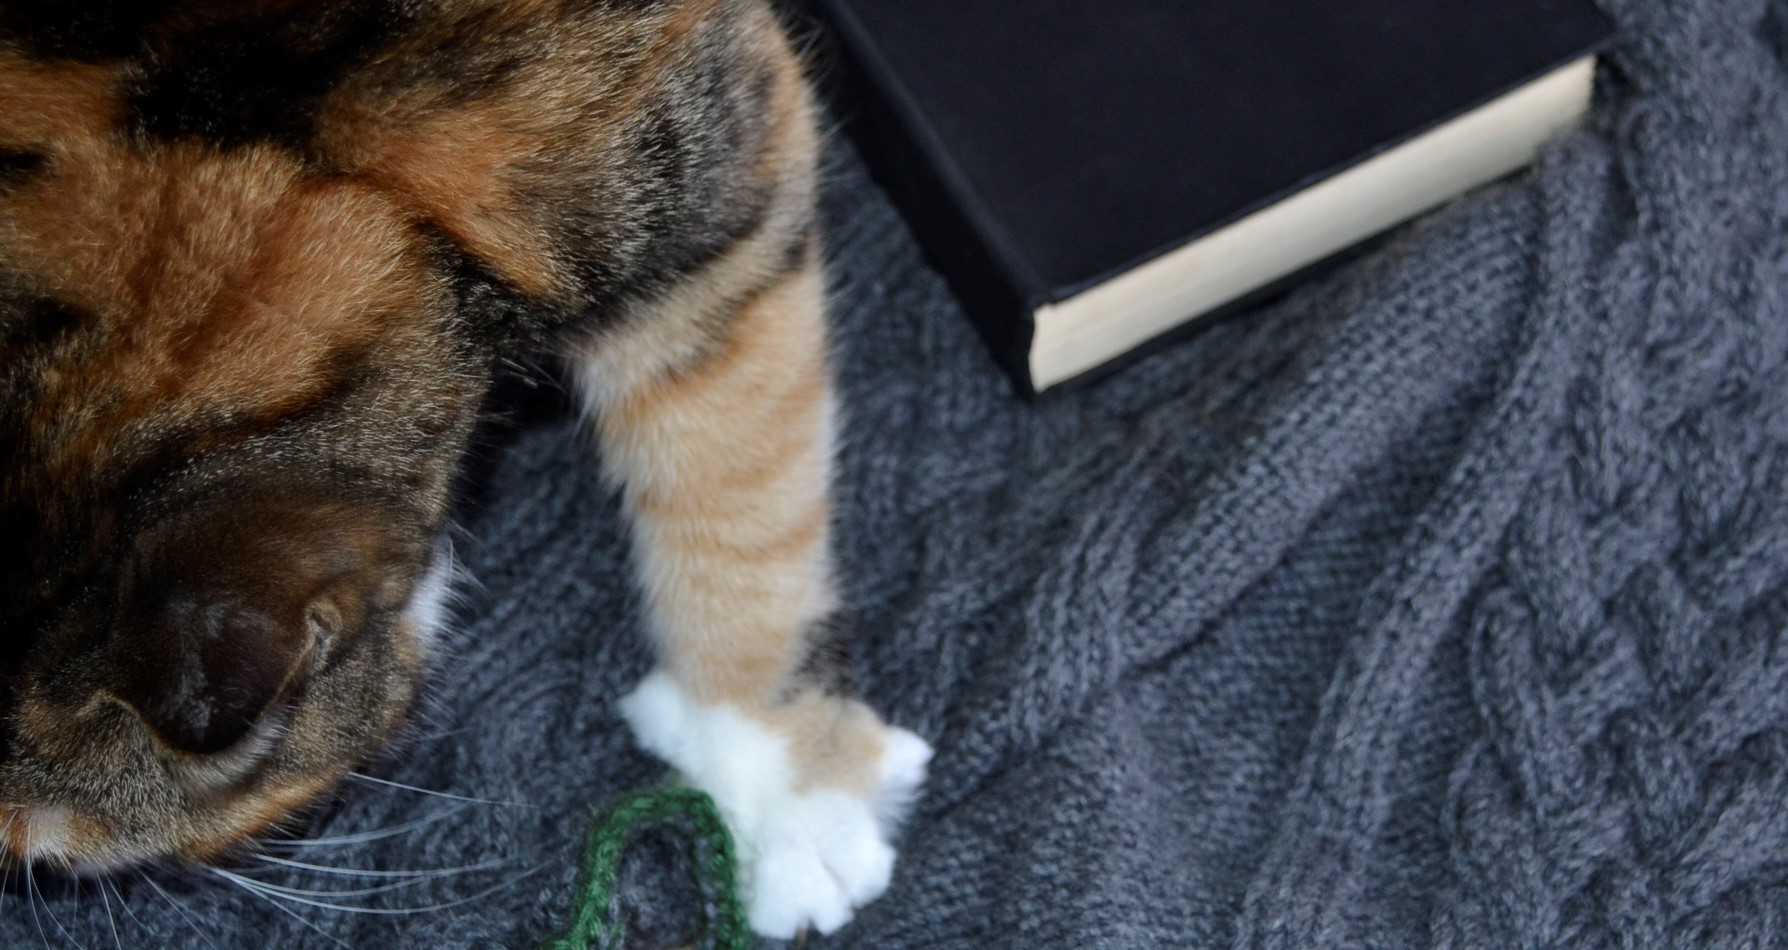 A calico tabby atacking a grey knit sweater and Doctor Faustus.